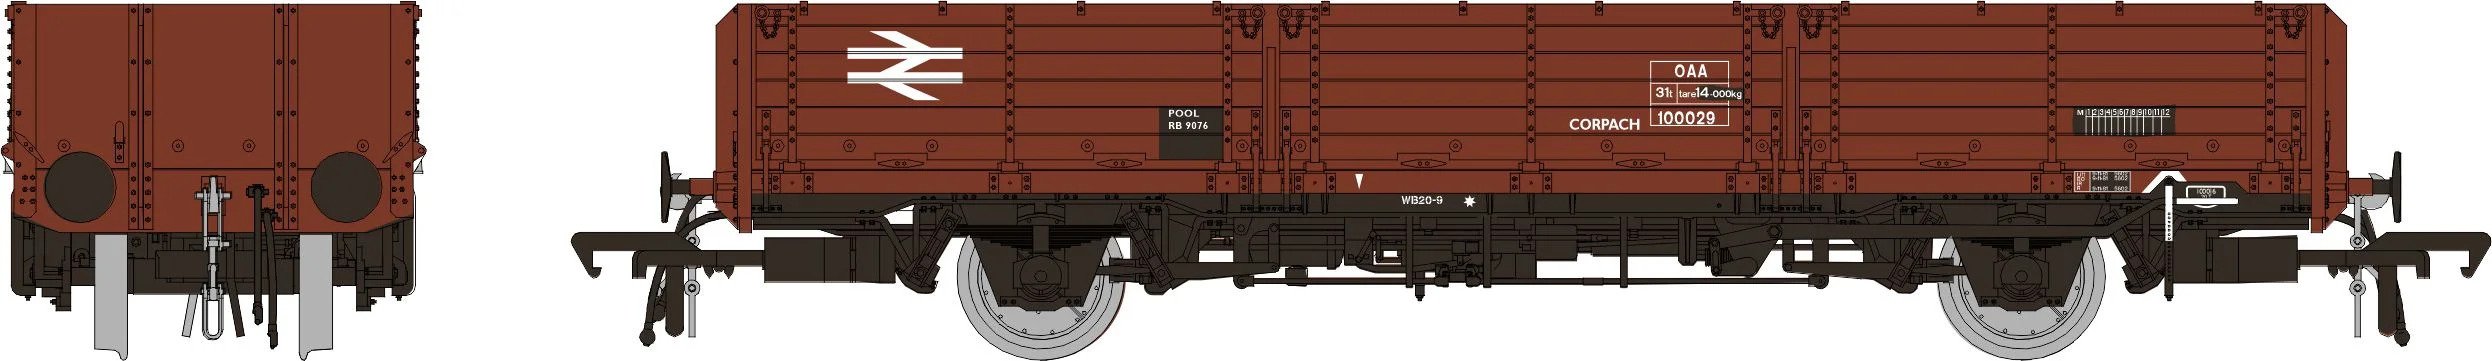 Rapido Trains 915006 OAA No. 100029, BR bauxite, Corpach pool lettering